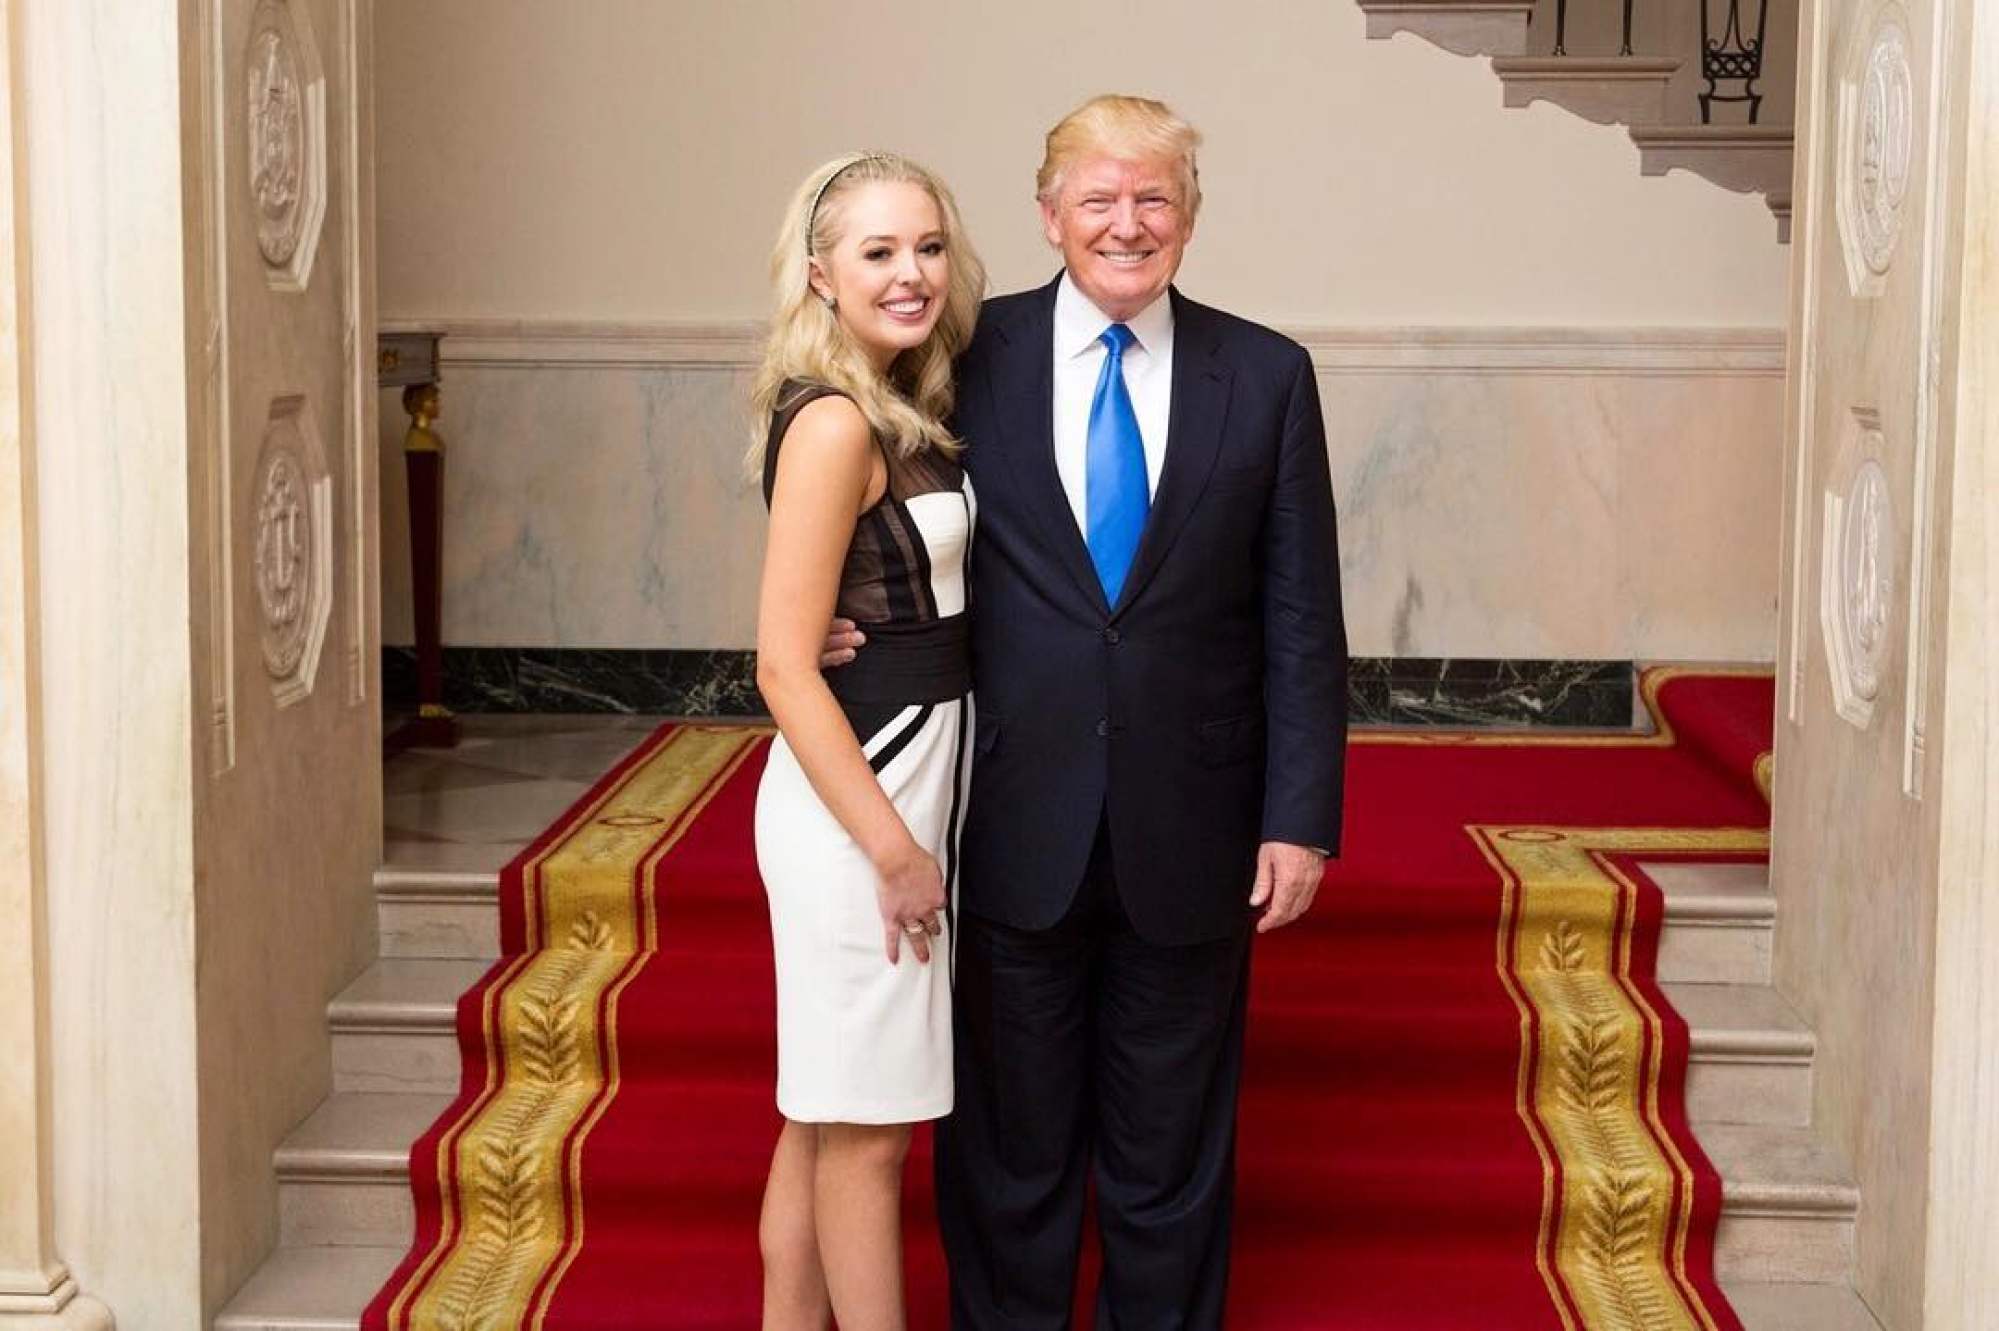 Tiffany and Donald Trump were seen together more often as she grew older. Photo: @tiffanytrump/Instagram